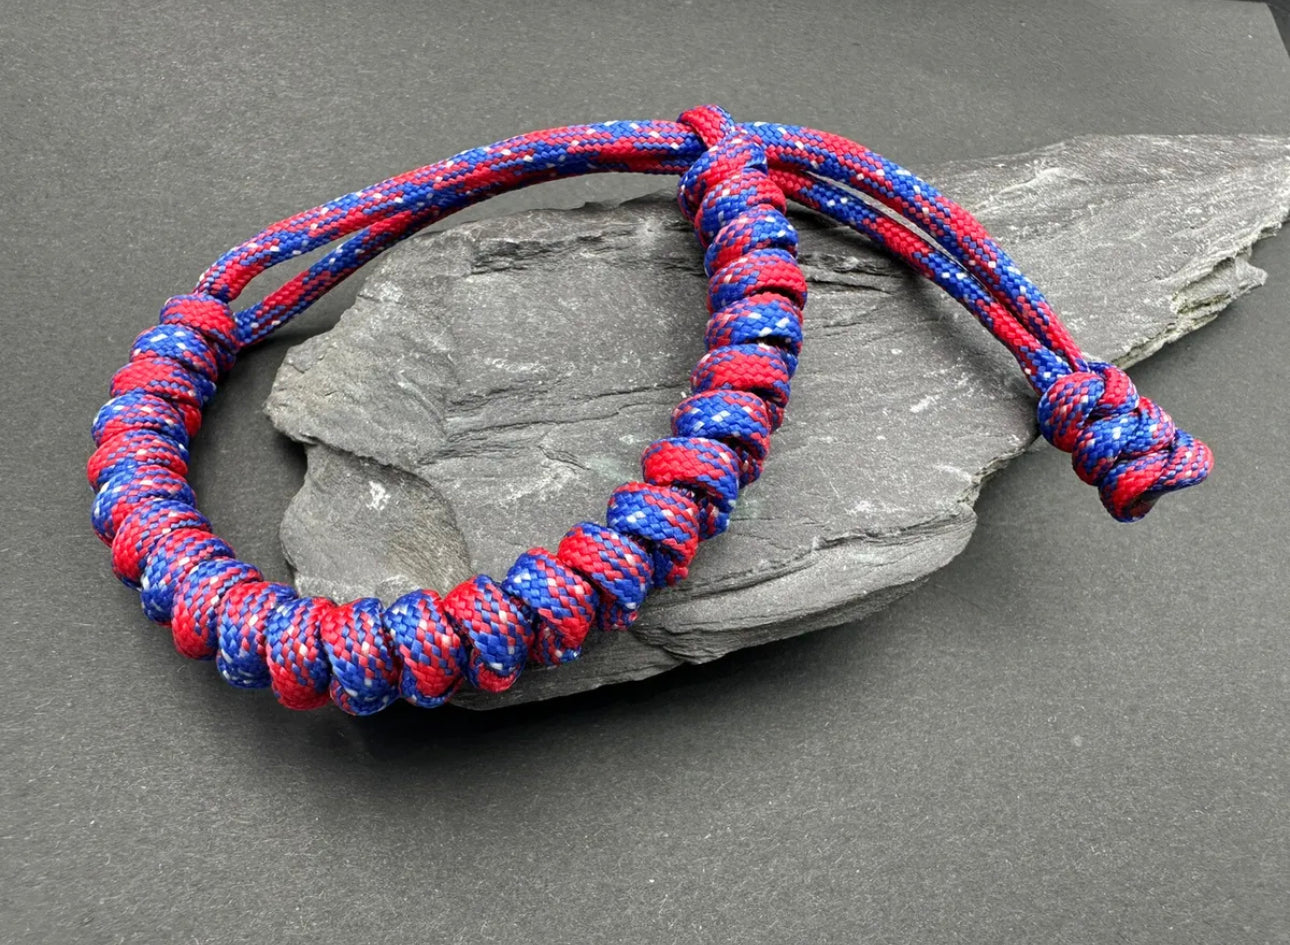 Paracord survival bracelets in Texas red flag colour (reds and blues) the item is lightweight comfortable and handmade in a snake knott tactical design U.K.